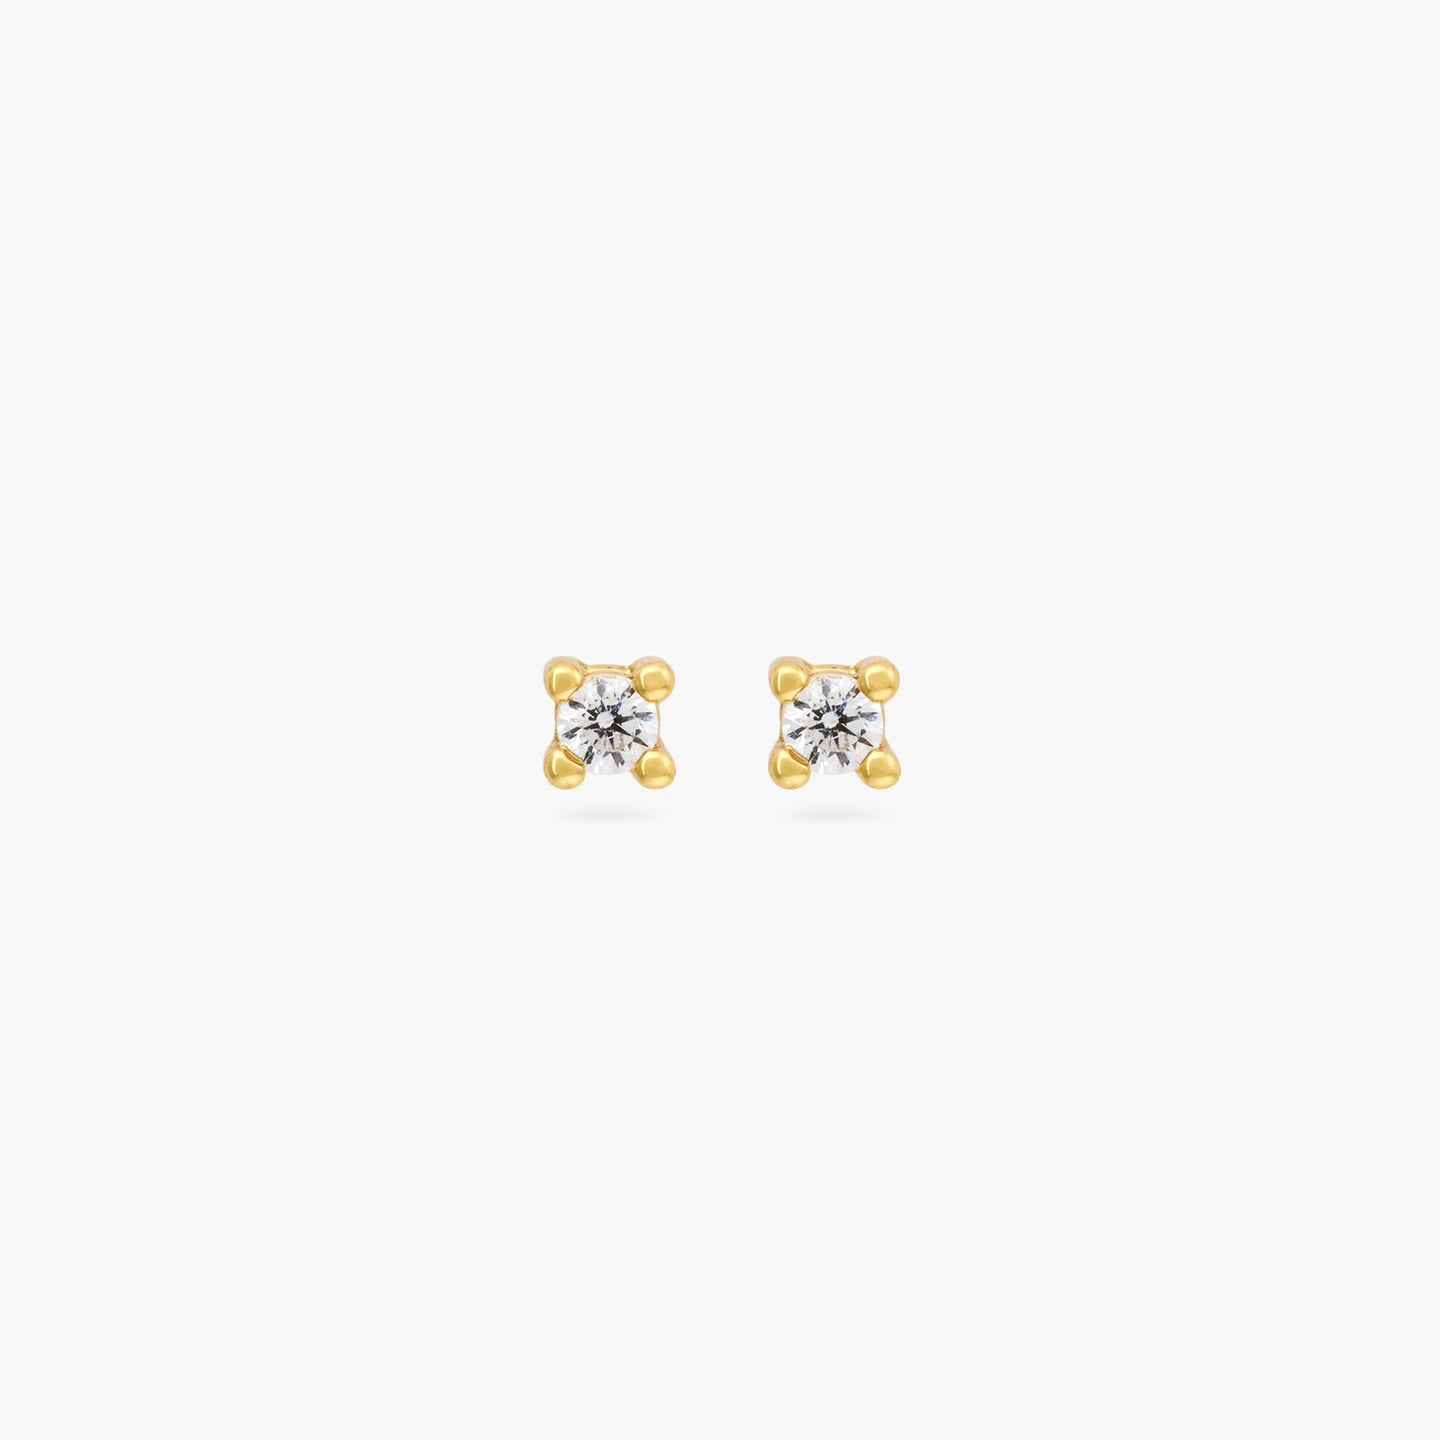 A pair of gold micro studs with a clear cz gems [pair] color:null|gold/clear